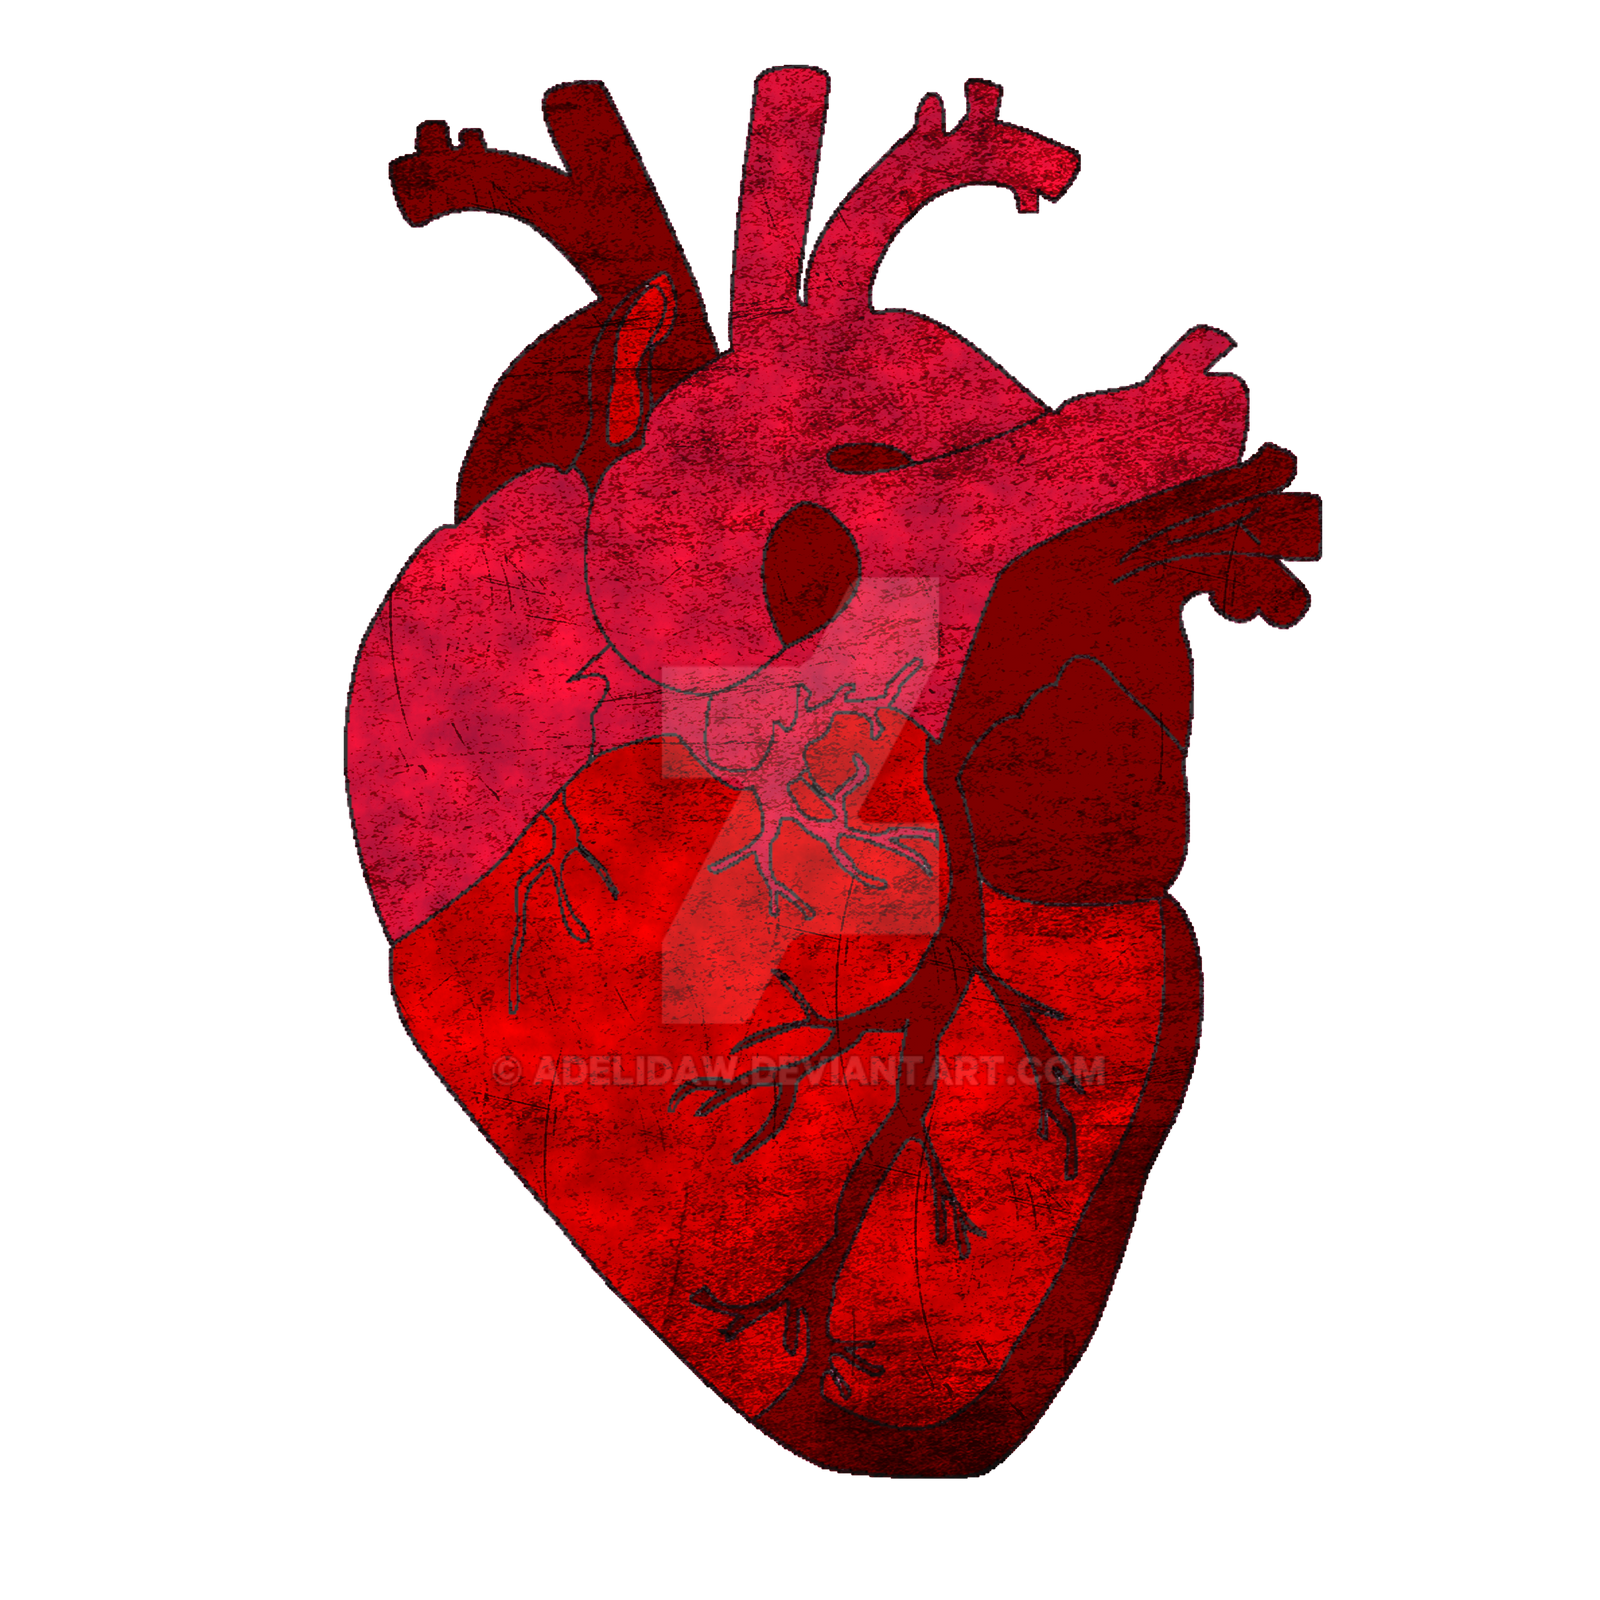 Human Heart By Adelidaw On Deviantart